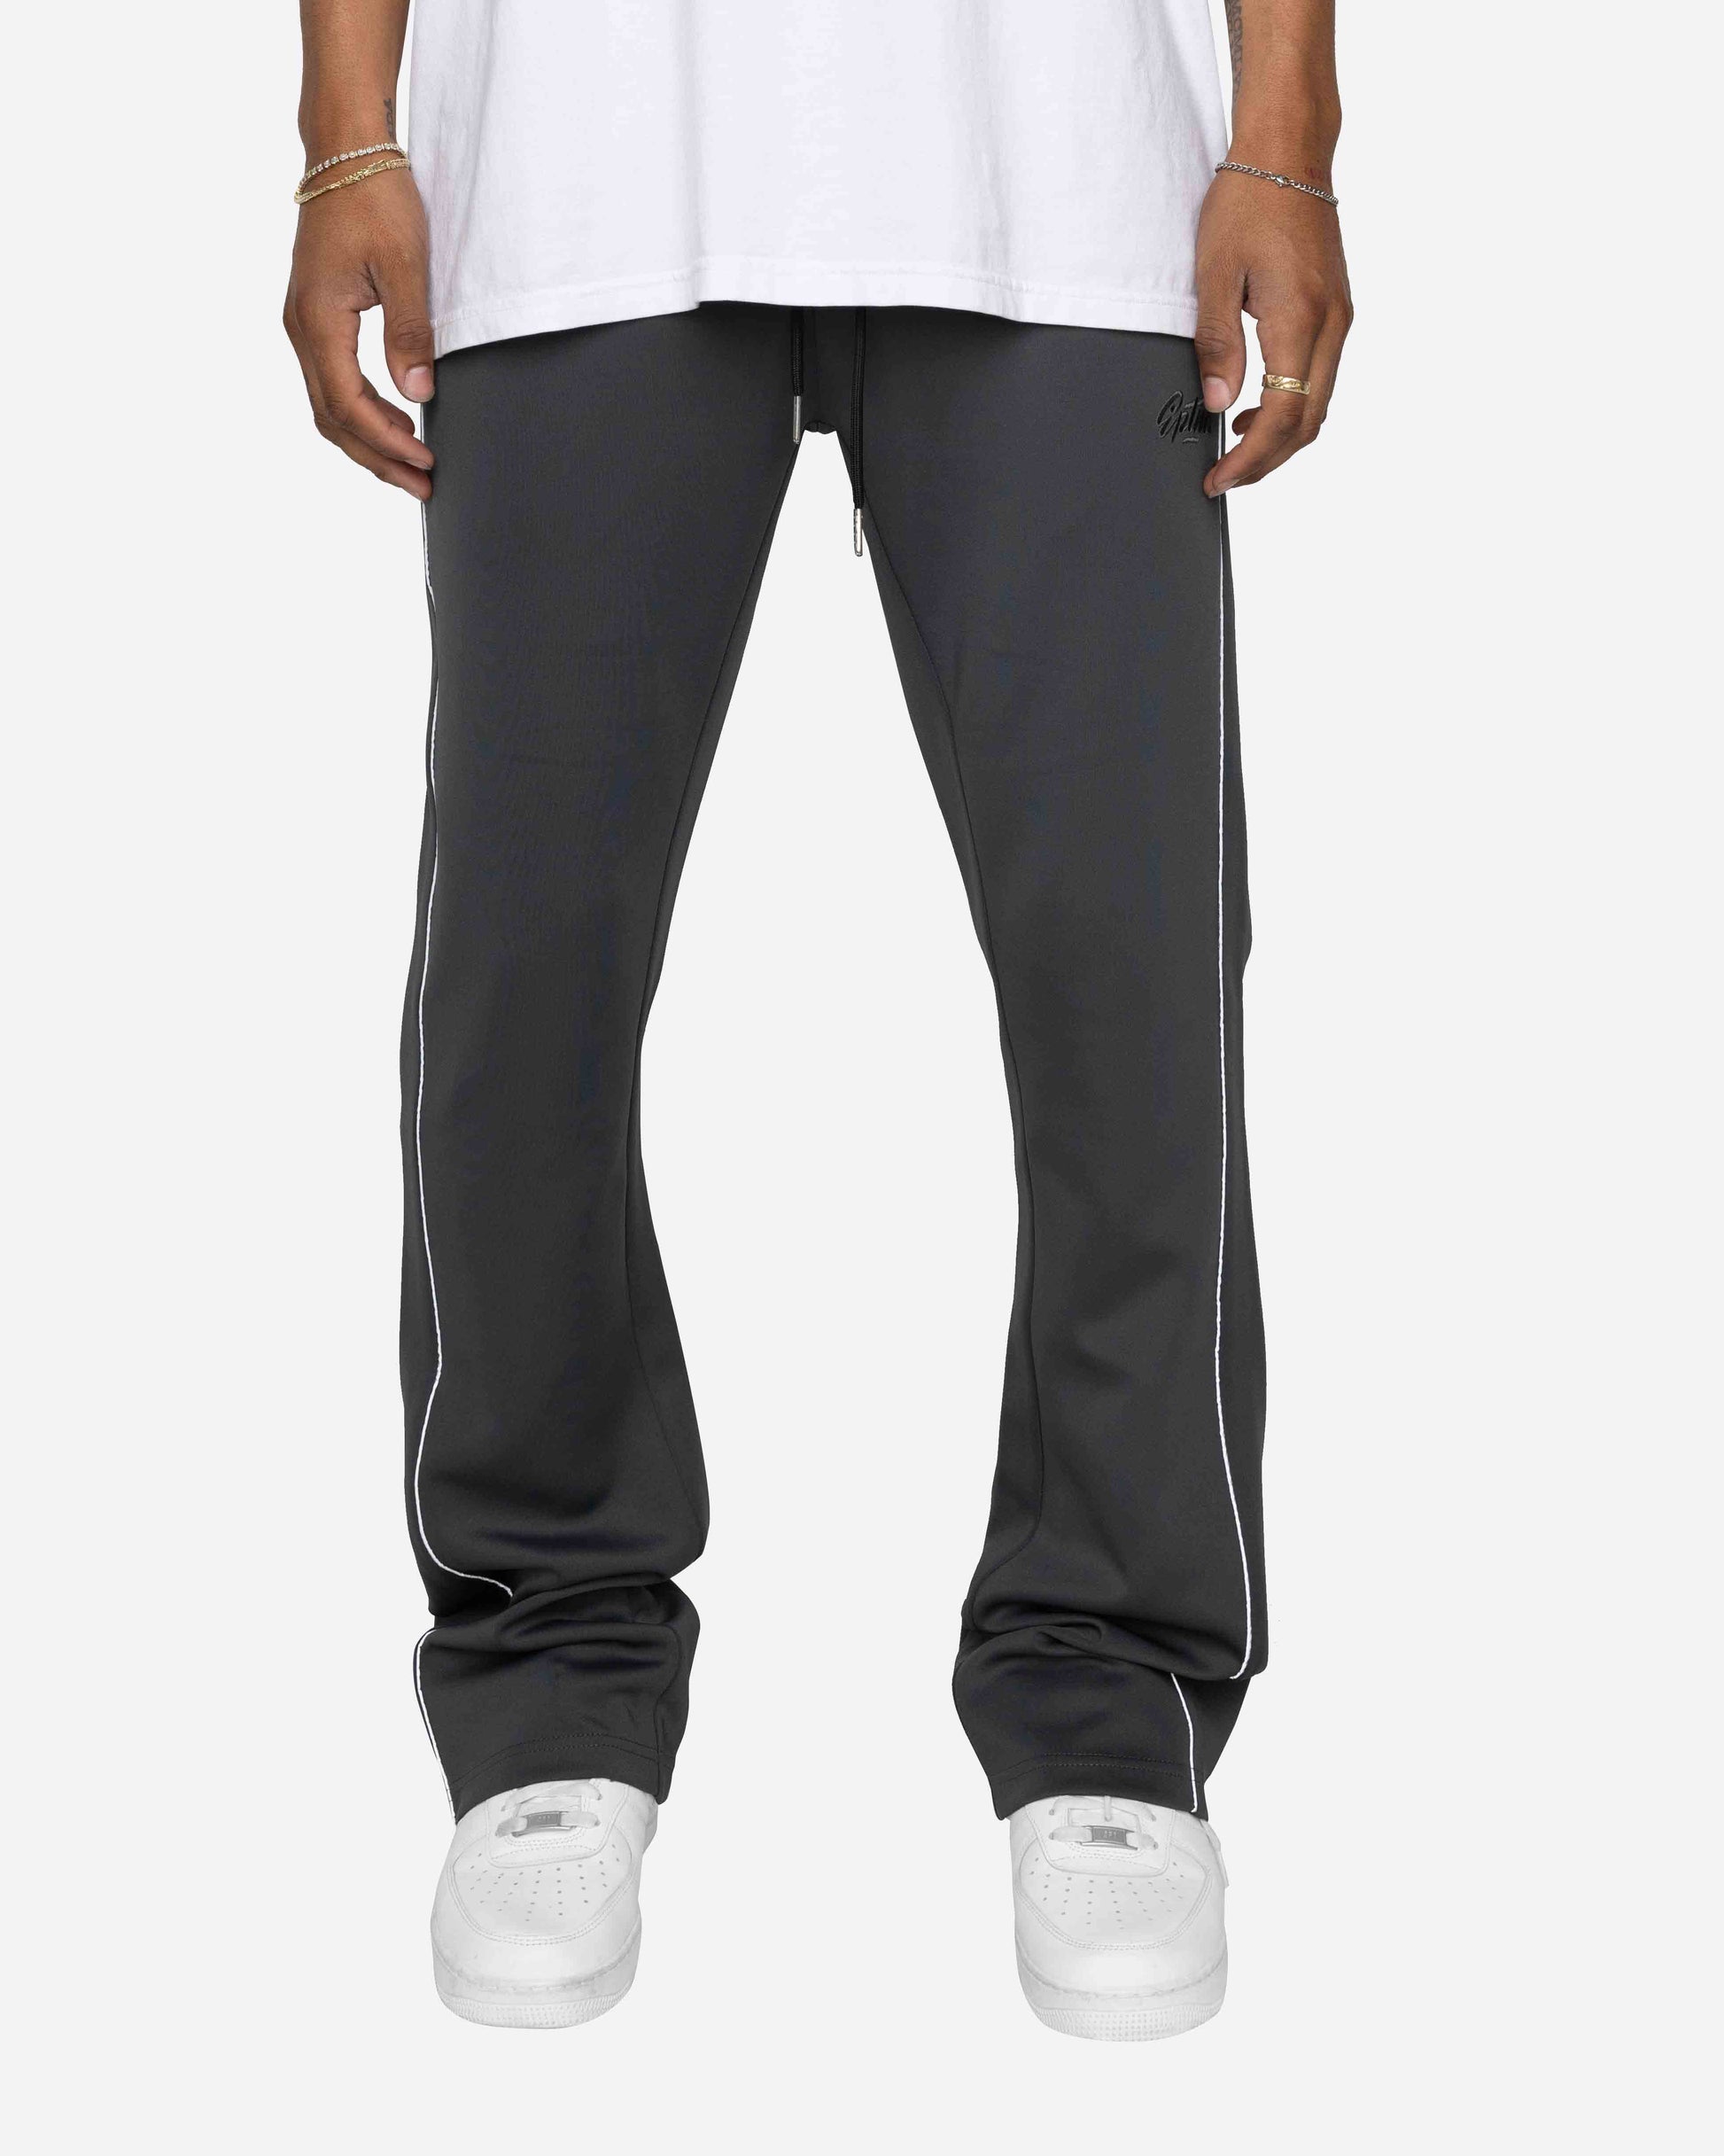 EPTM PIPING FLARED TRACK PANTS-CHARCOAL – EPTM.